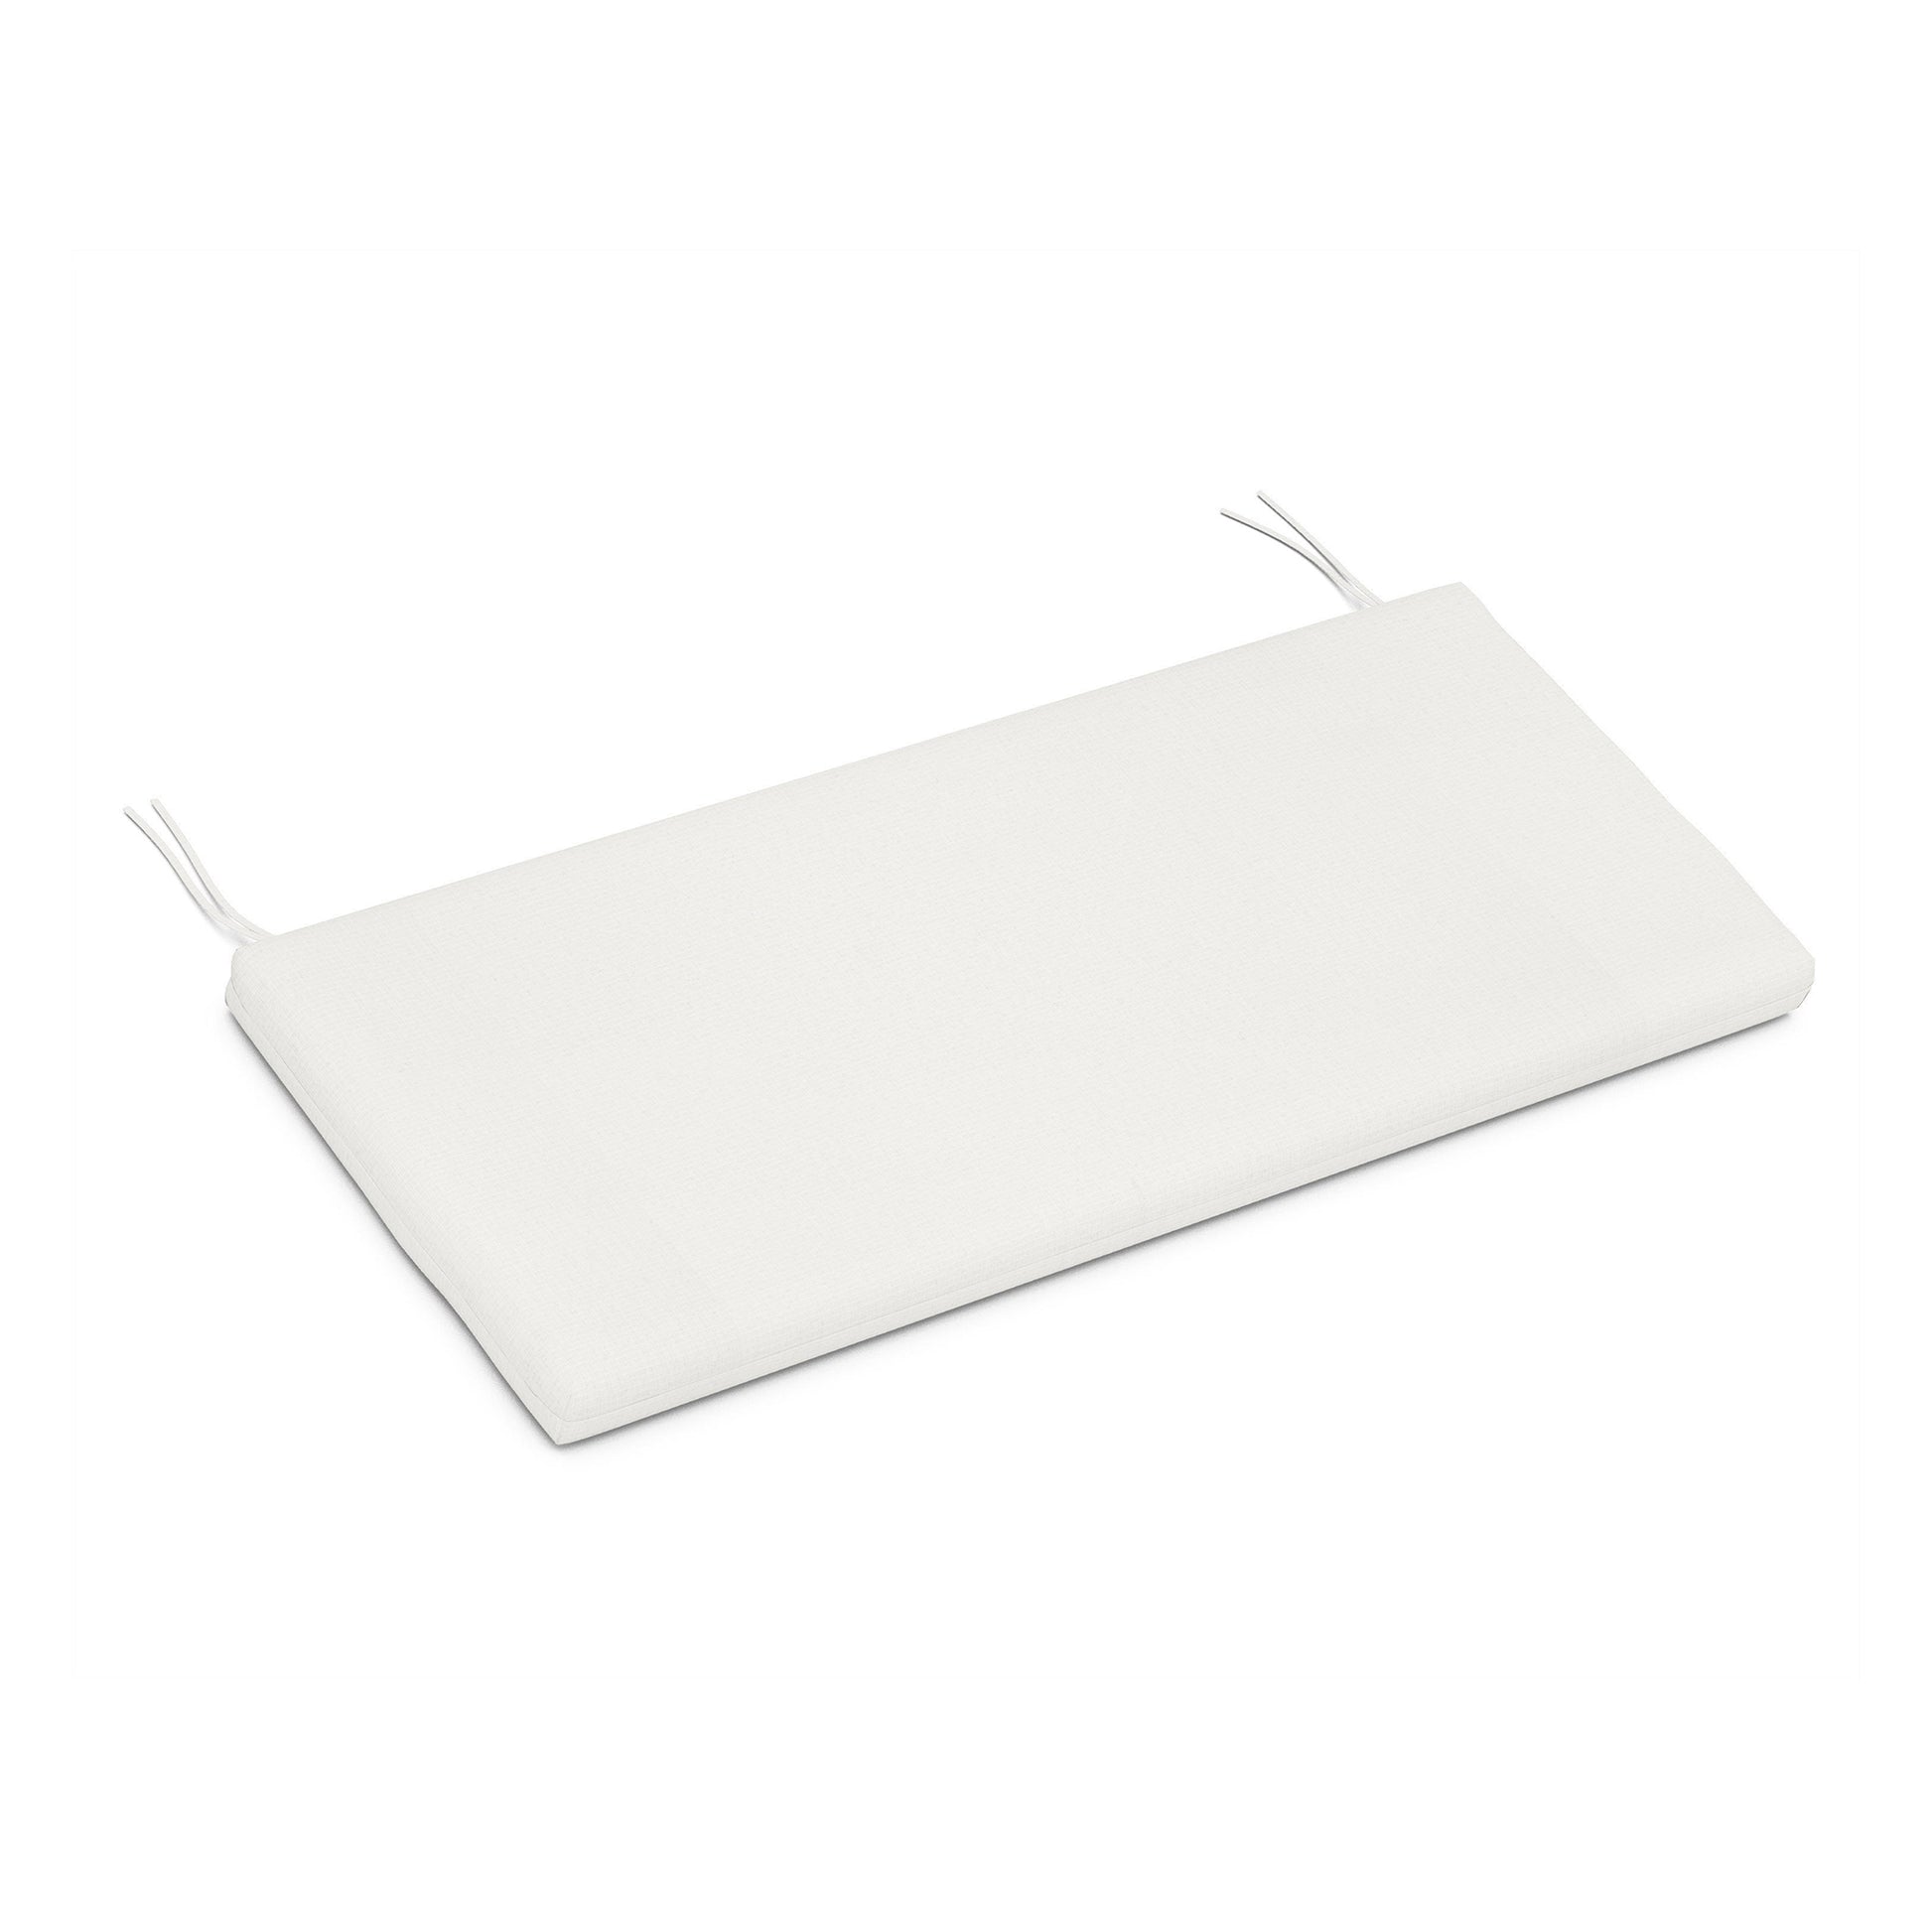 A white rectangular POLYWOOD seat cushion with two ties on each short end, crafted from weather-resistant upholstery fabric, displayed on a white background for a streamlined appearance.